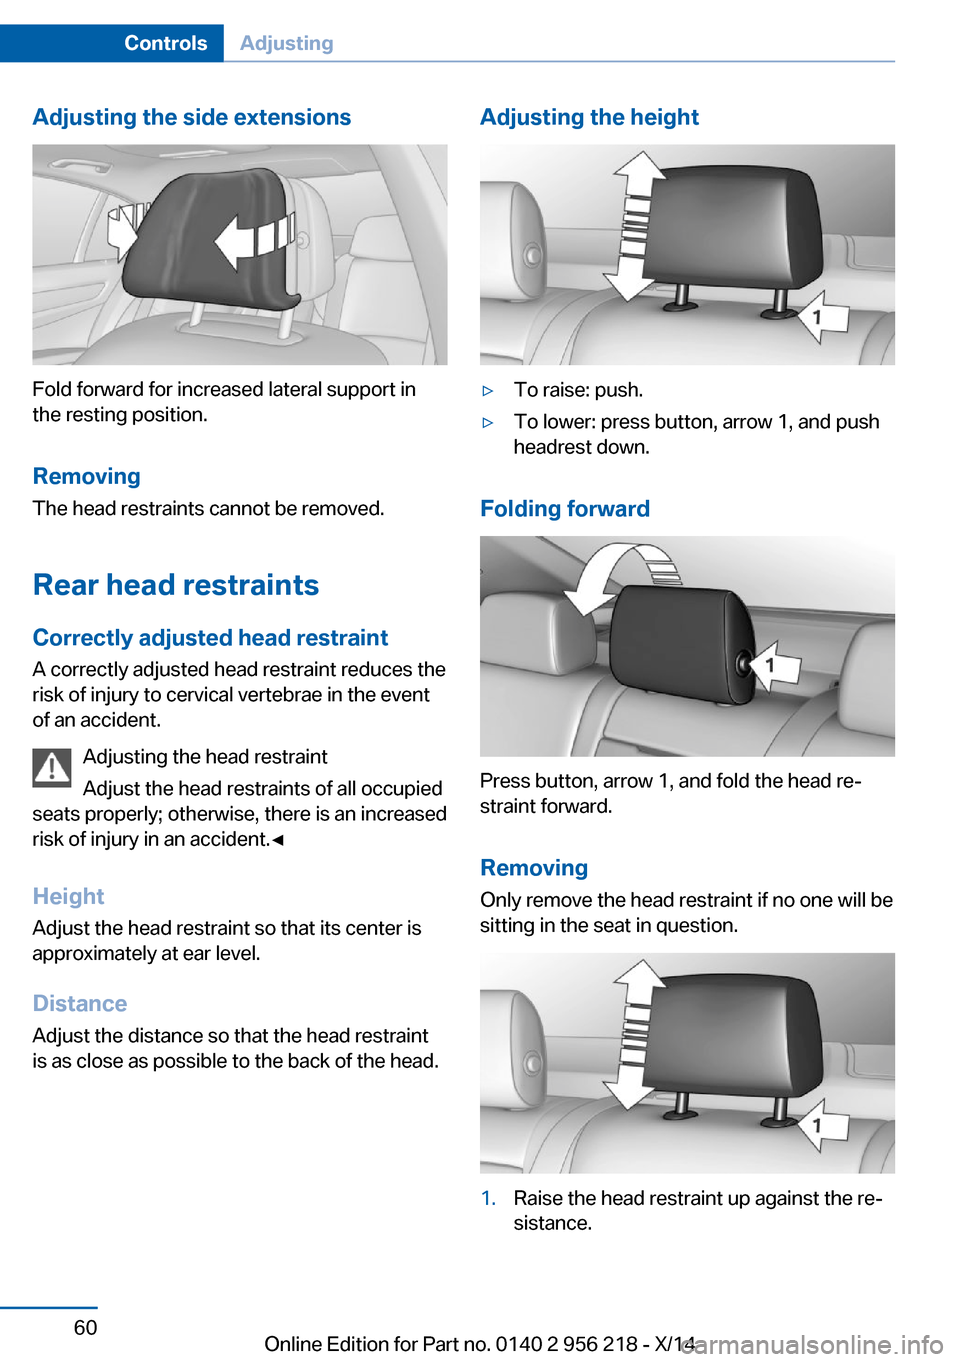 BMW 5 SERIES 2014 F10 Owners Manual Adjusting the side extensions
Fold forward for increased lateral support in
the resting position.
Removing The head restraints cannot be removed.
Rear head restraints
Correctly adjusted head restraint